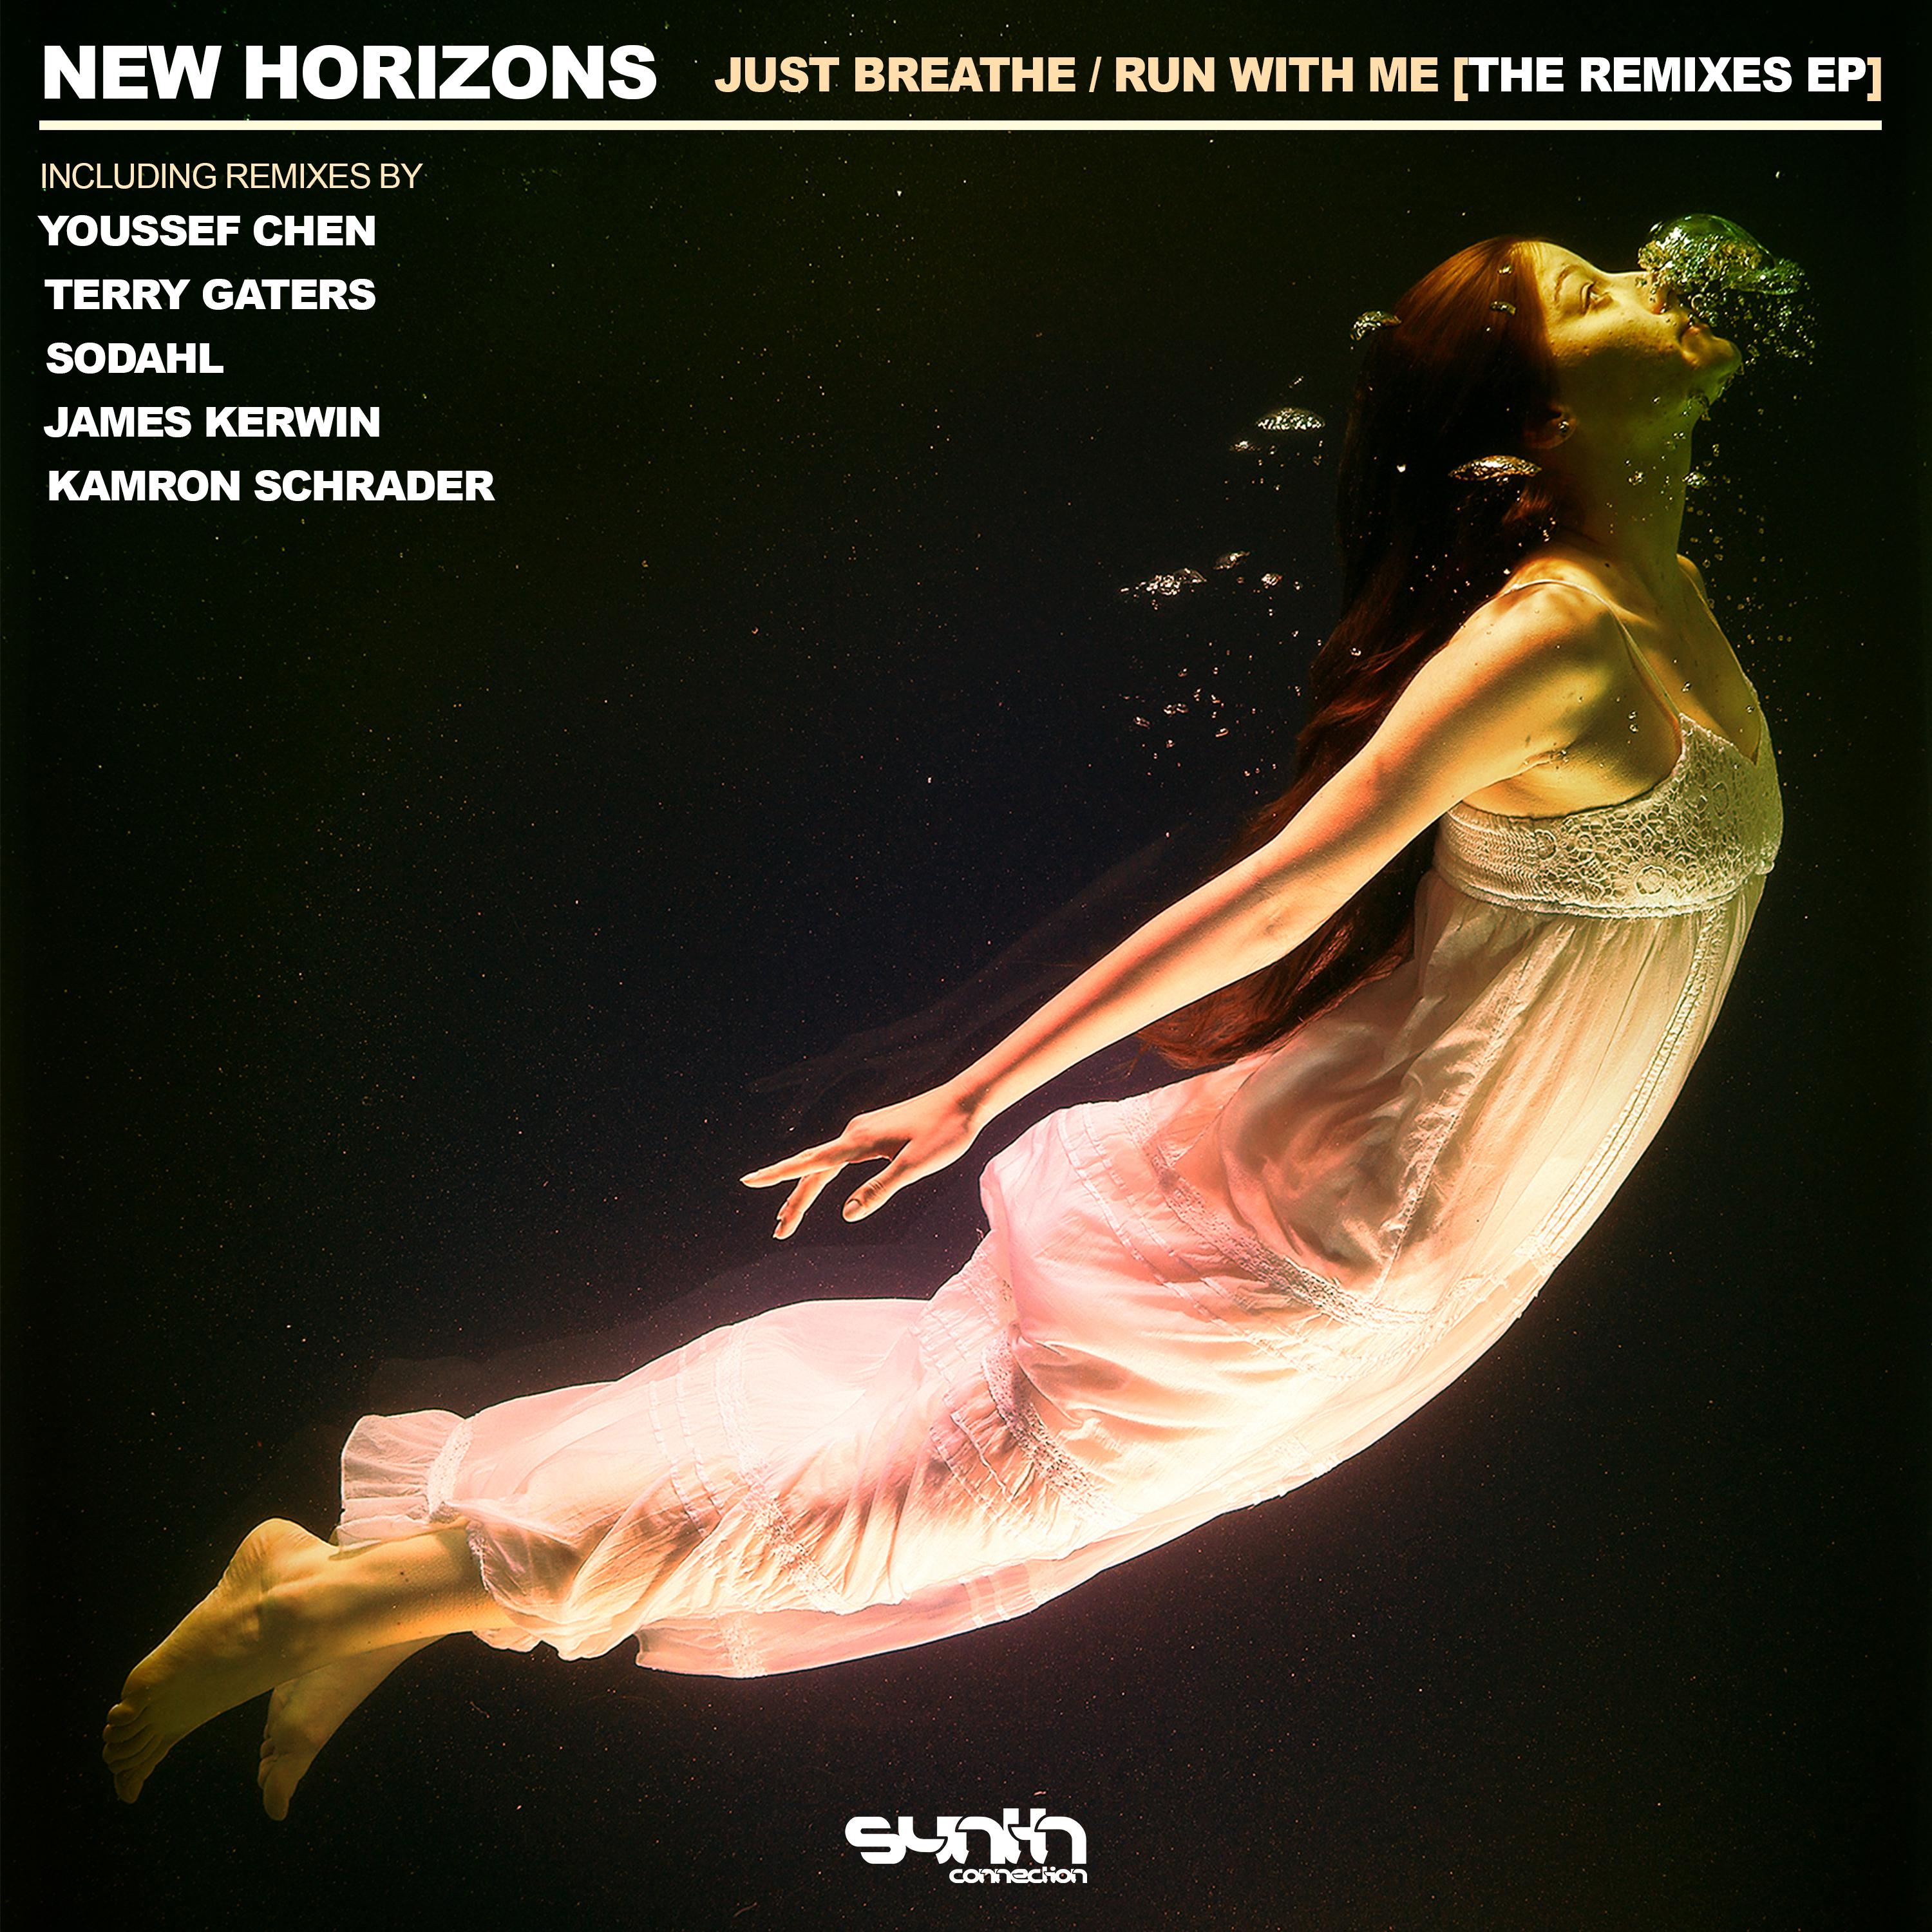 New Horizons - Run With Me (Youssef Chen Remix)